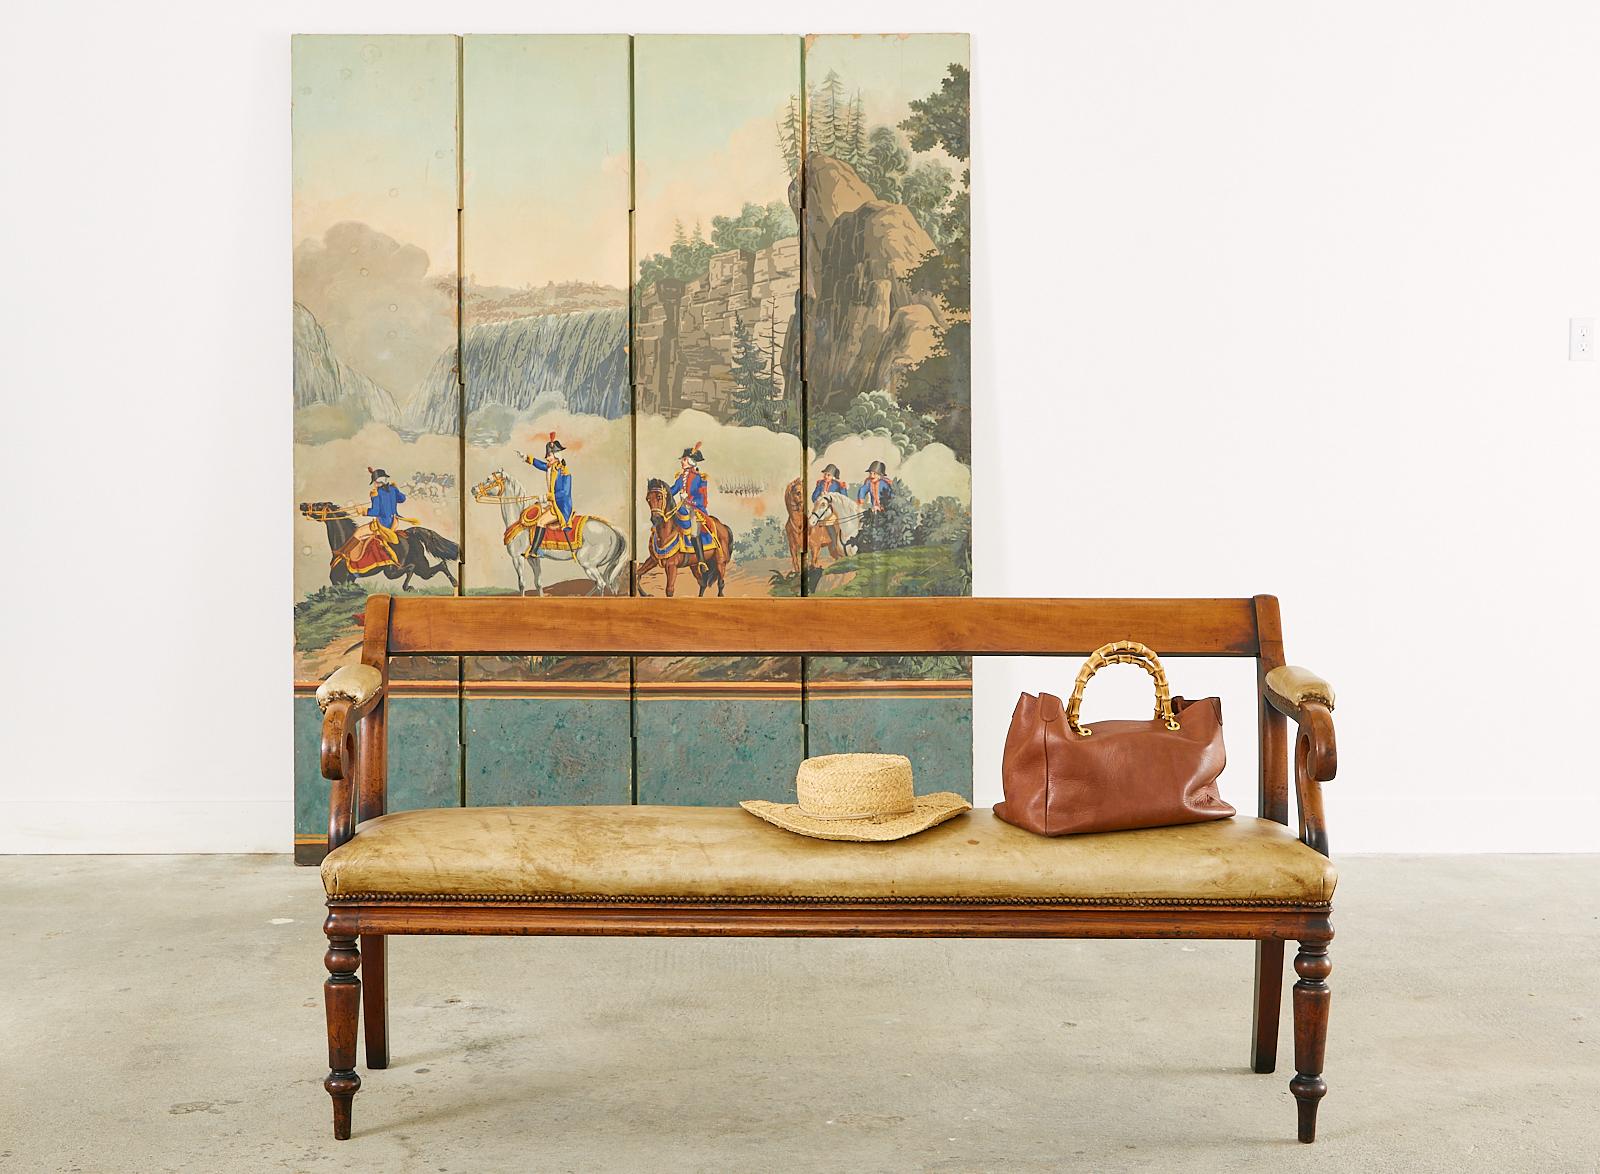 Amazing wallpaper four panel screen by Zuber and Cie. Panel numbers 29, 30, 31, 32 from the War of American Independence scenic wallpapers. The iconic panels are still being printed today from woodblocks carved in 1852. Beautifully crafted with an